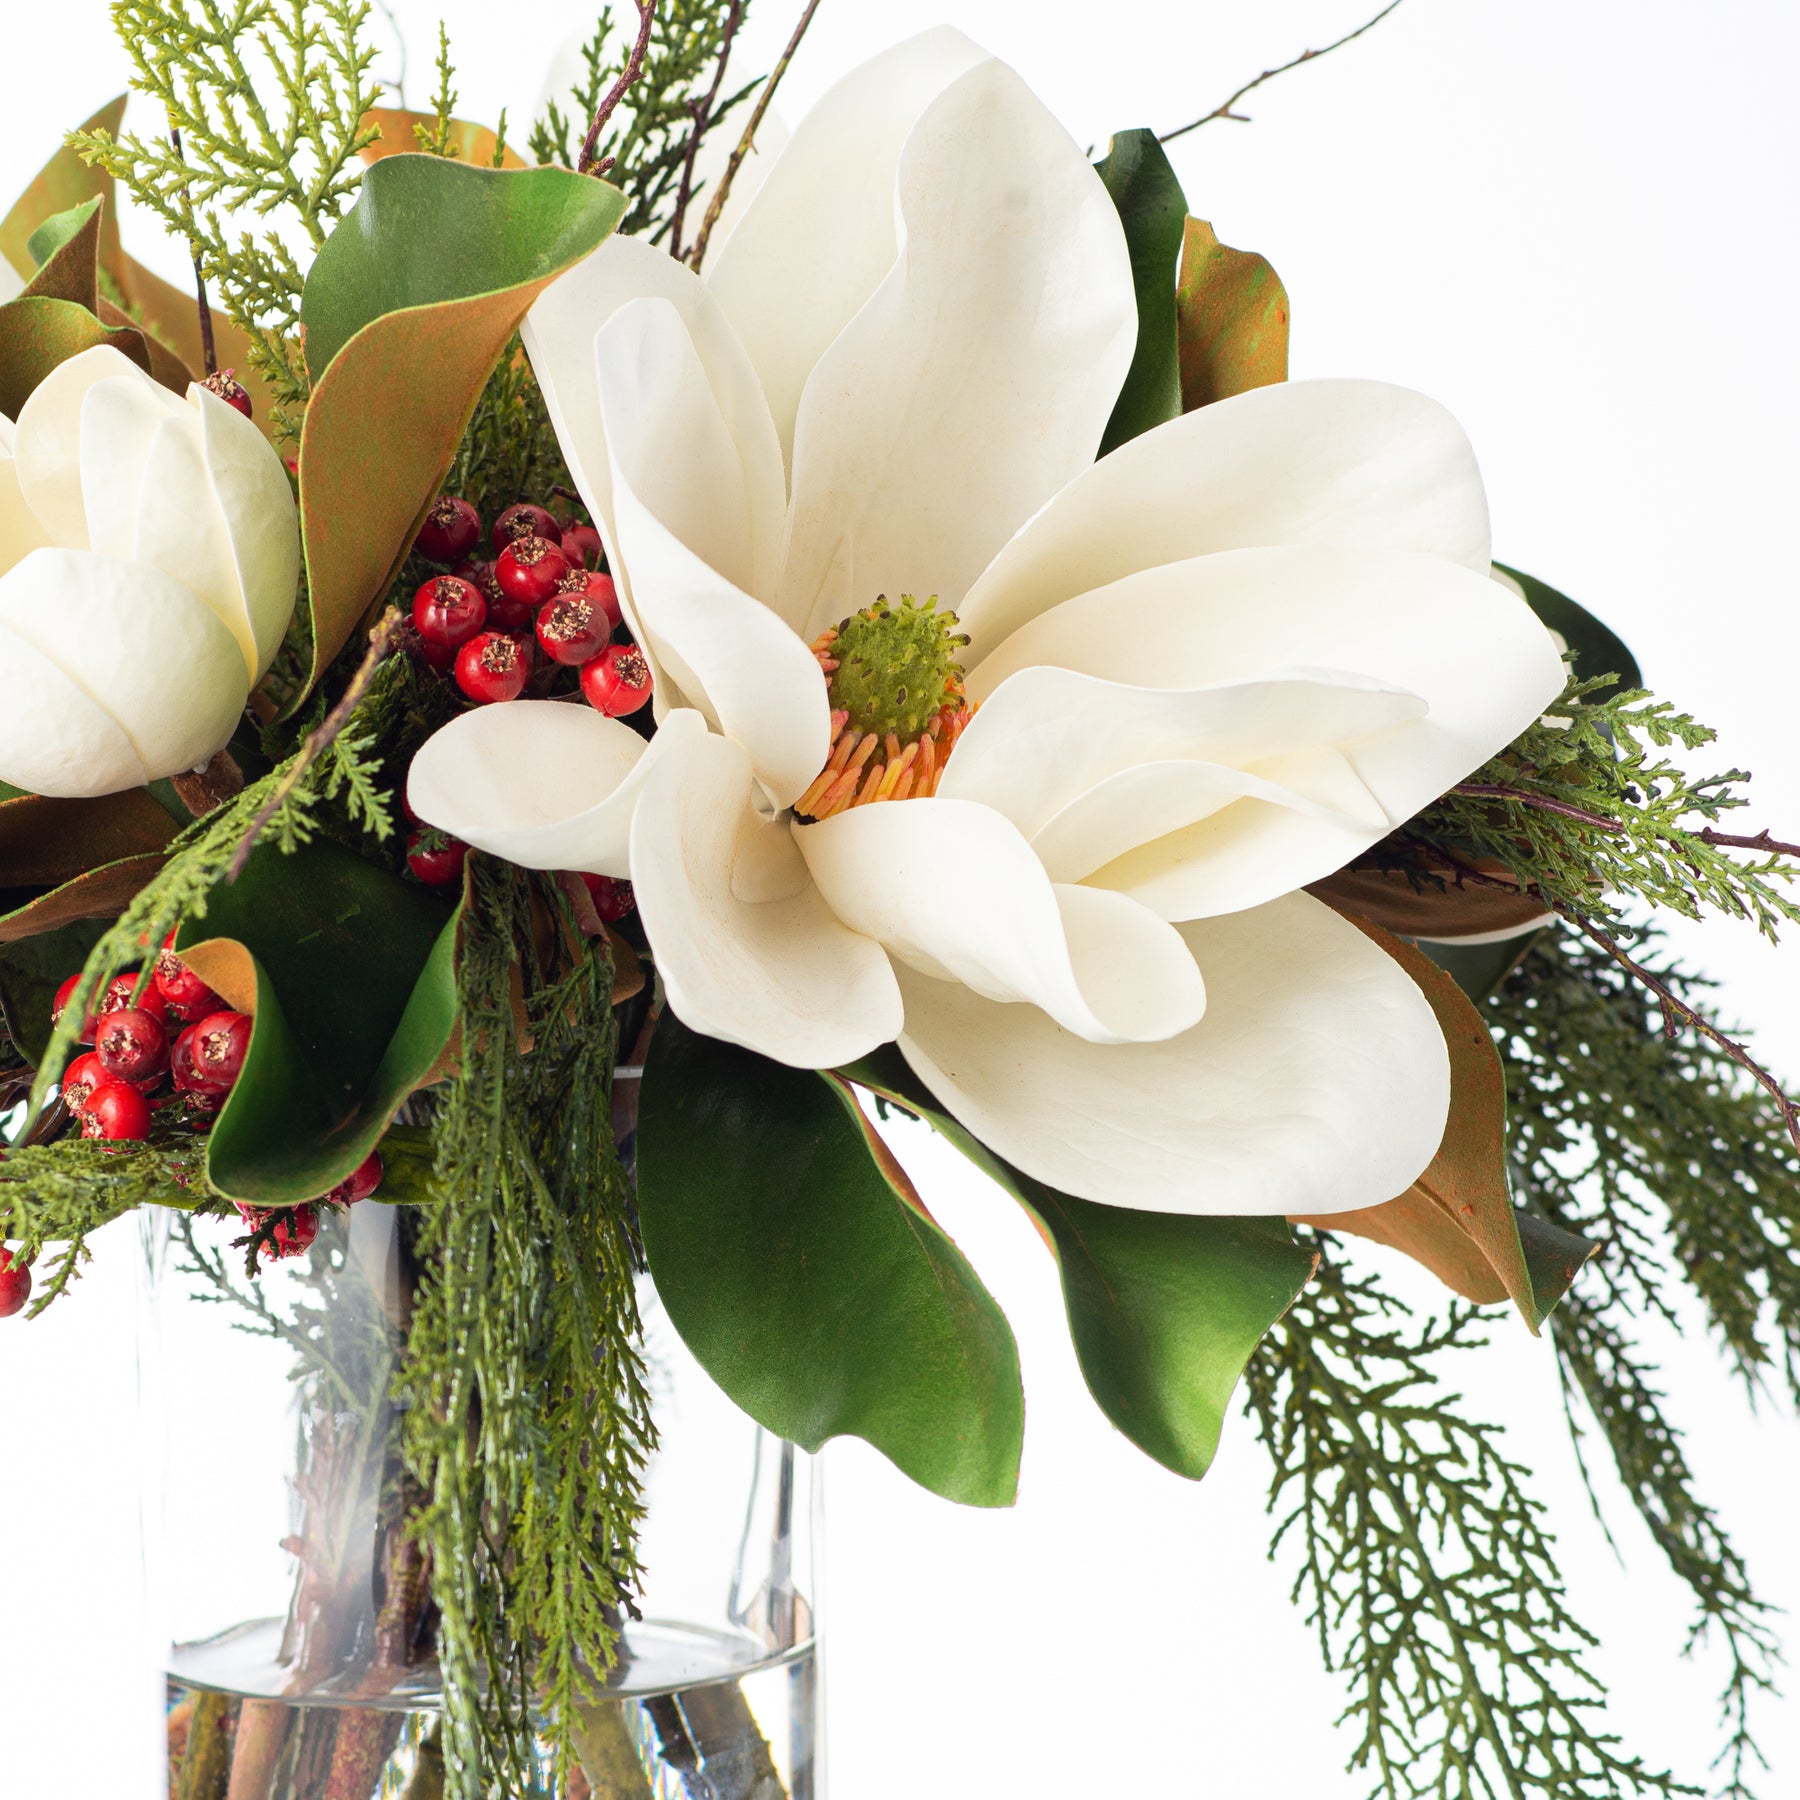 White Magnolia, Mixed Greens & Berry Everyday Winter Floral Arrangement  Centerpiece in Tapered Glass Vase